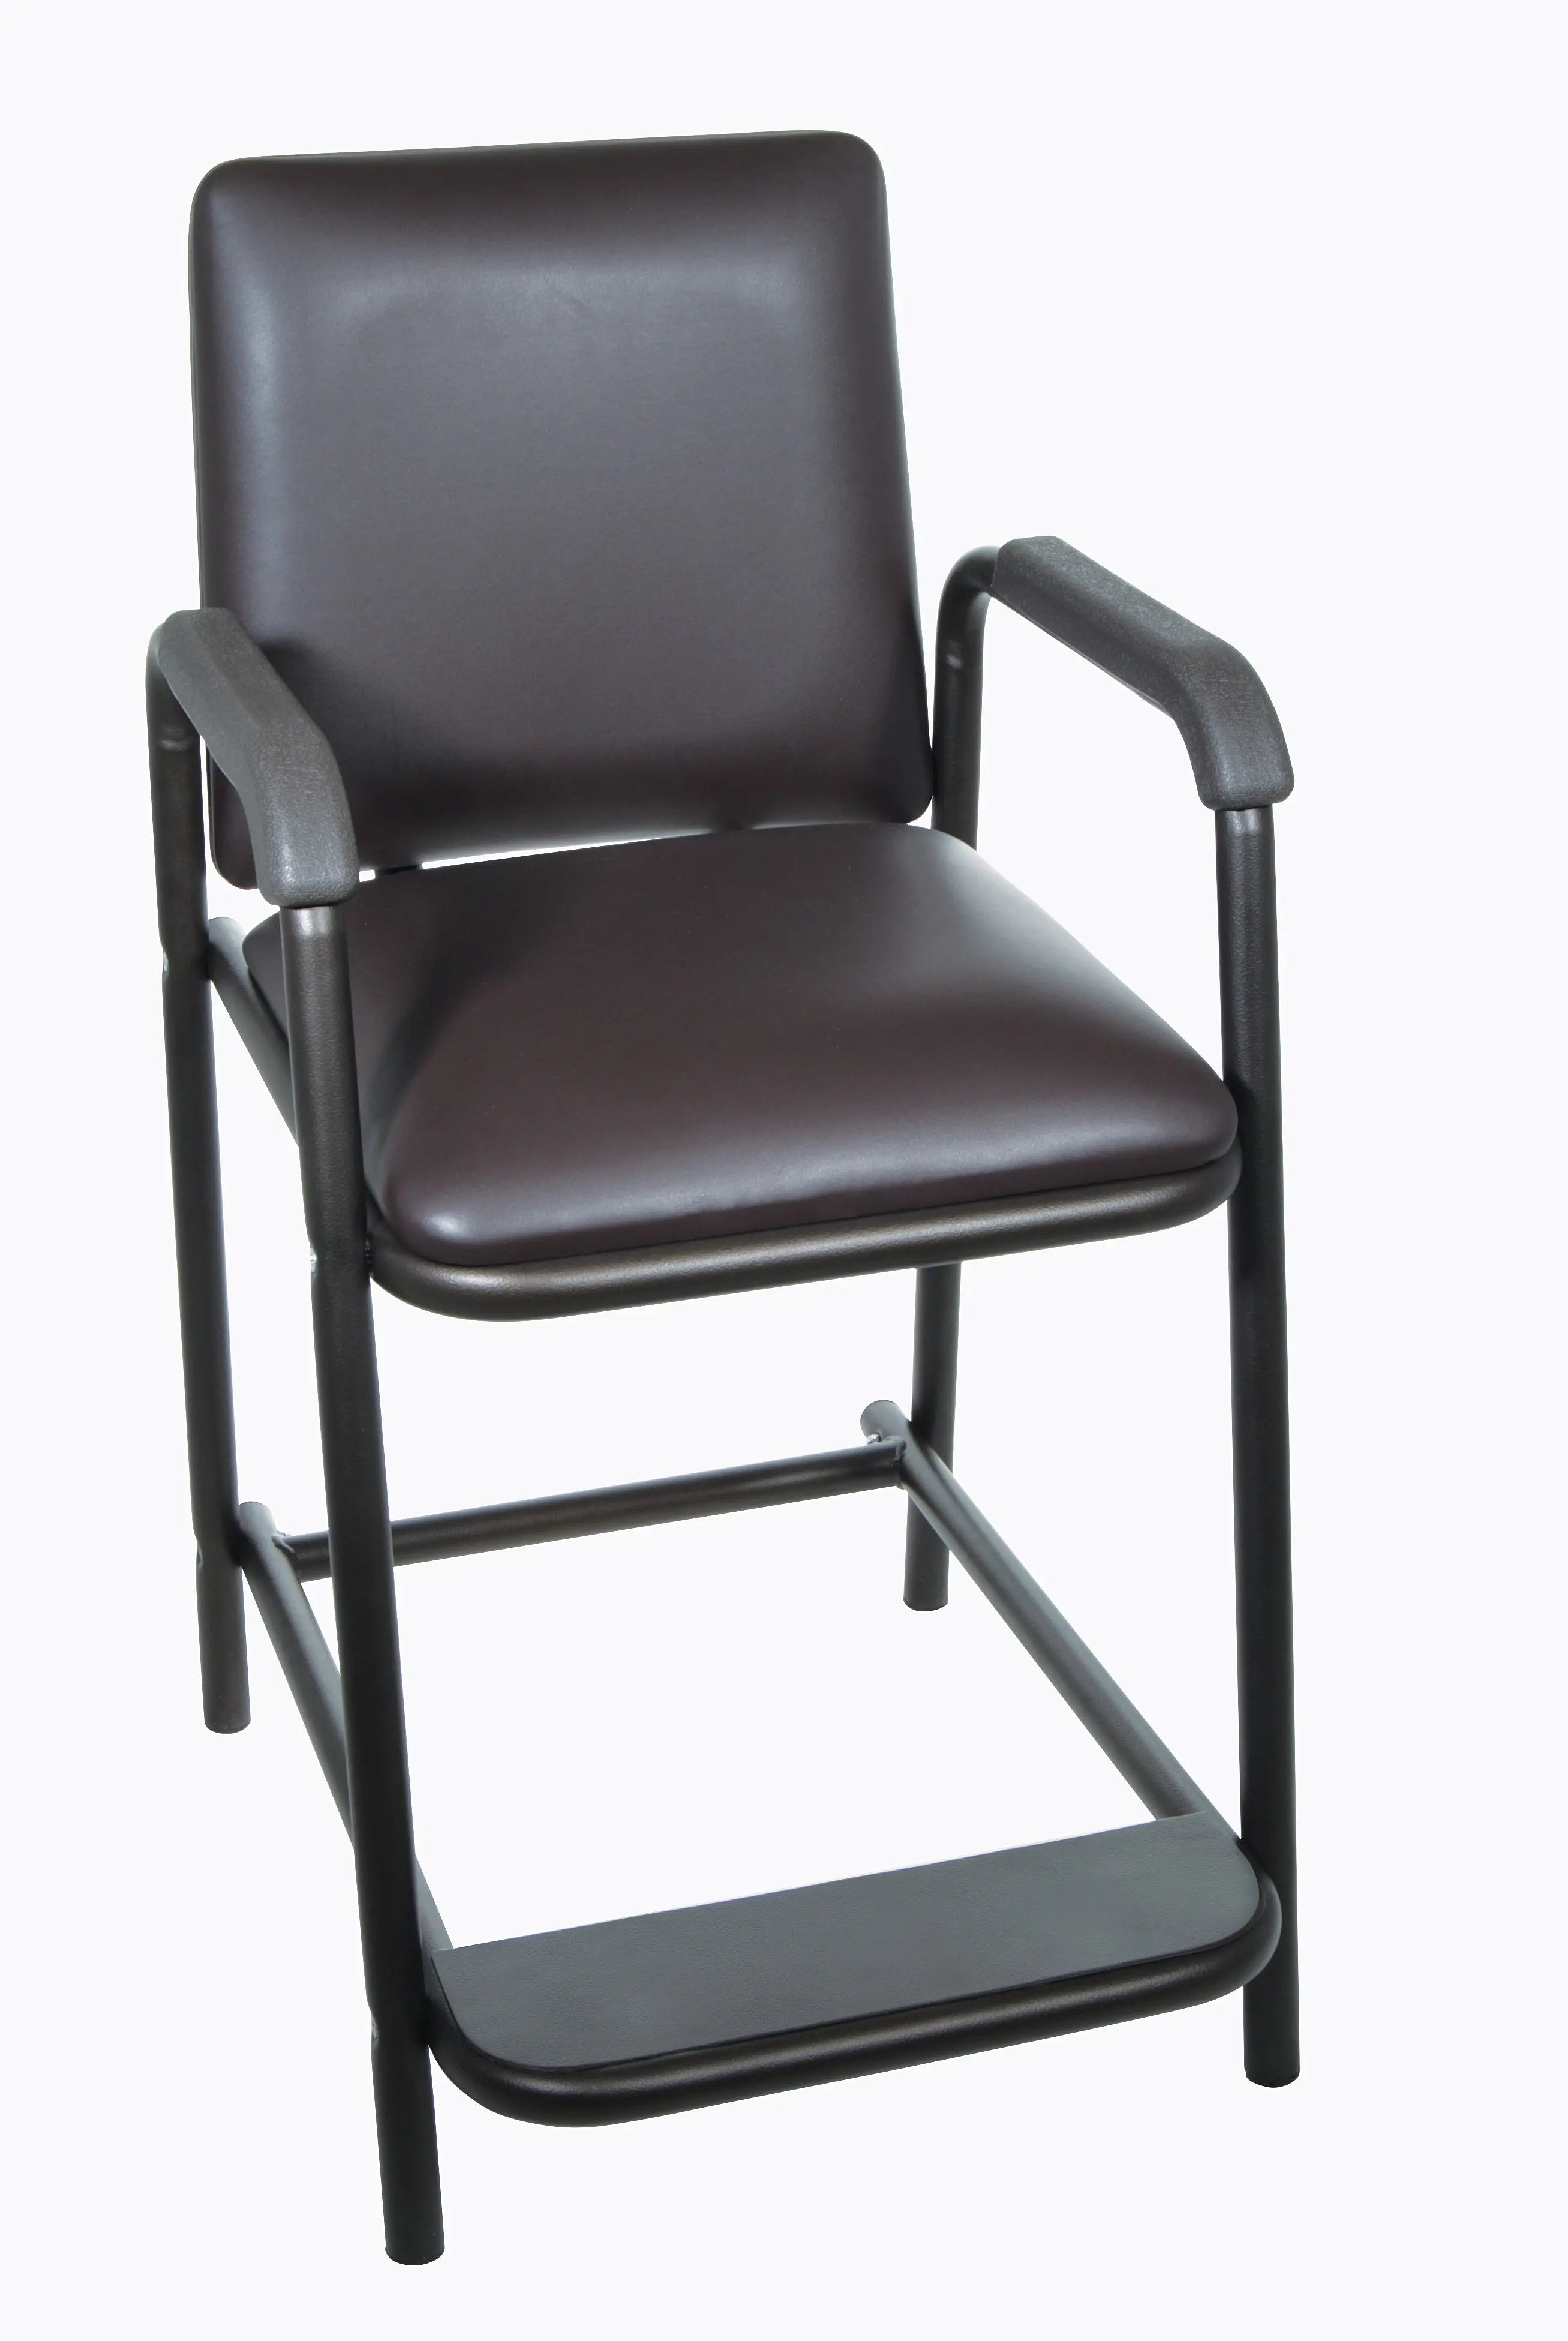 Hip High Chair with Padded Seat